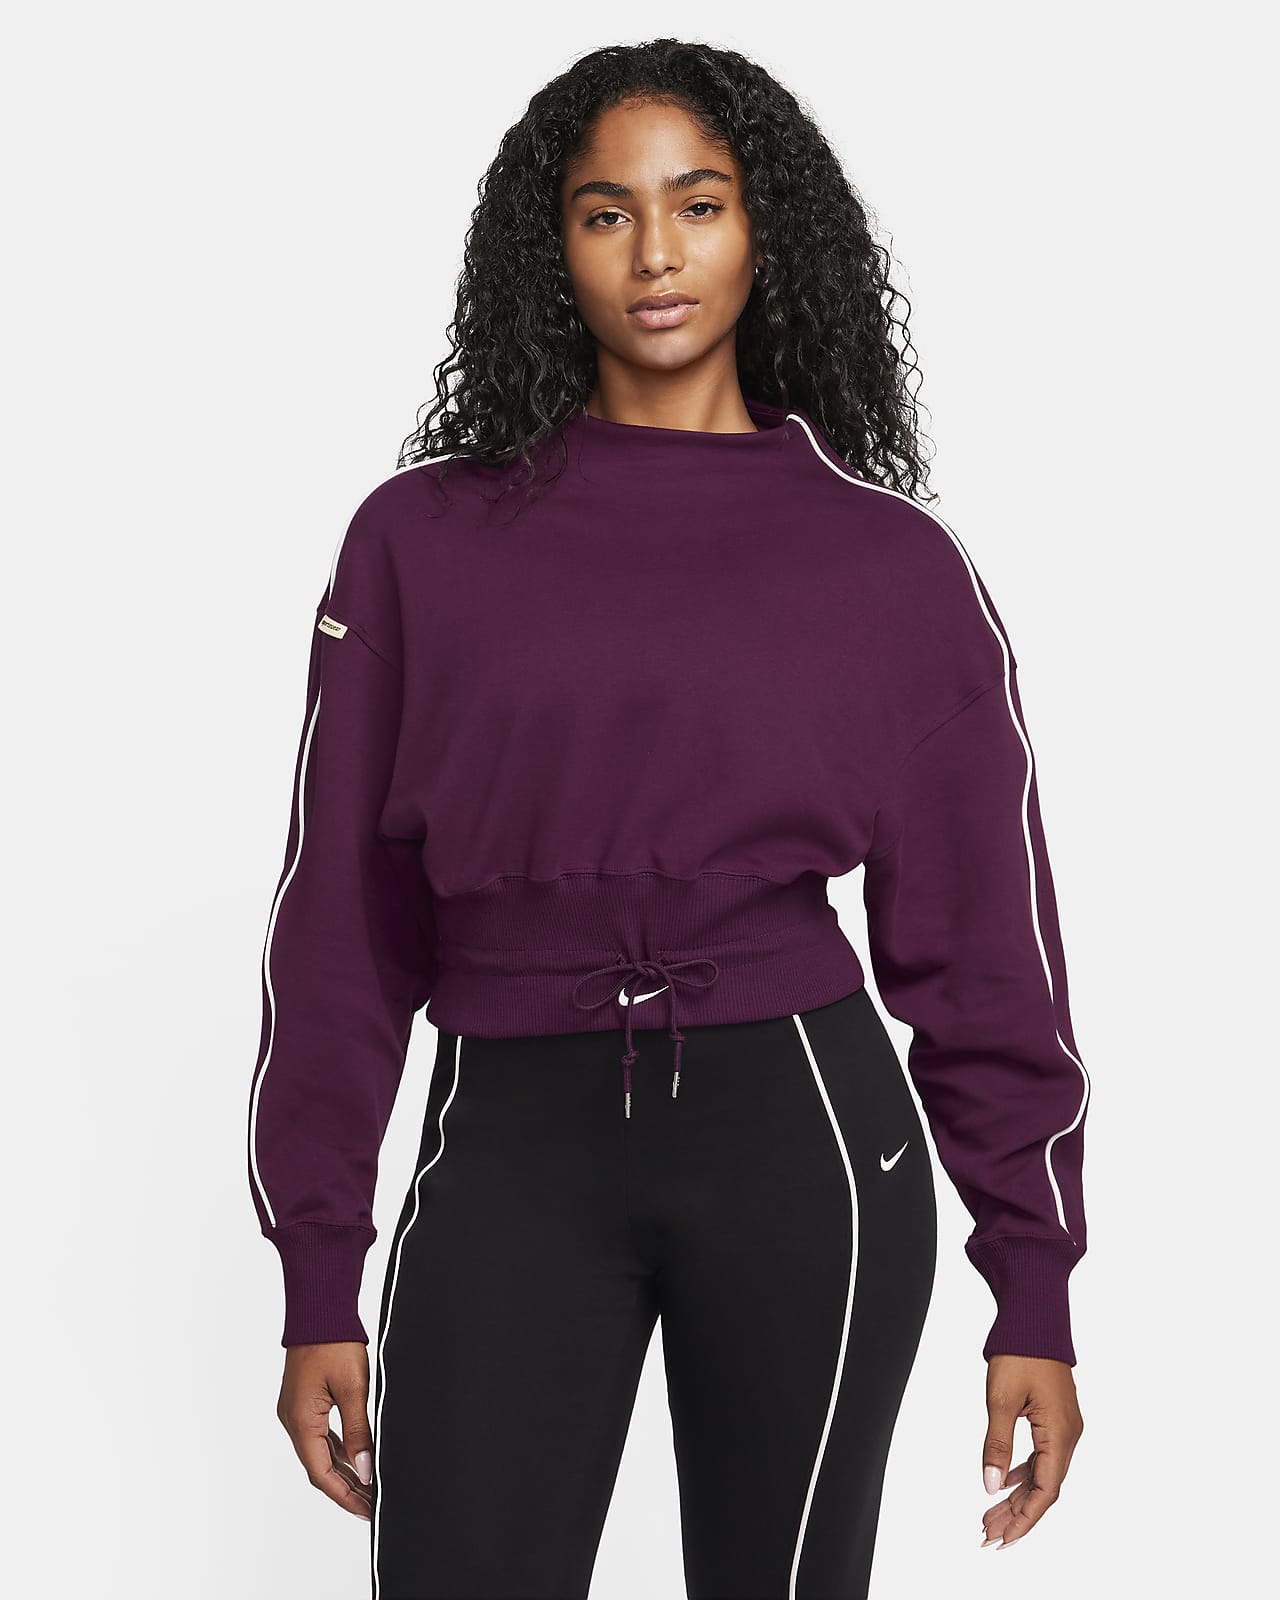 Nike Womens Activewear in Womens Clothing